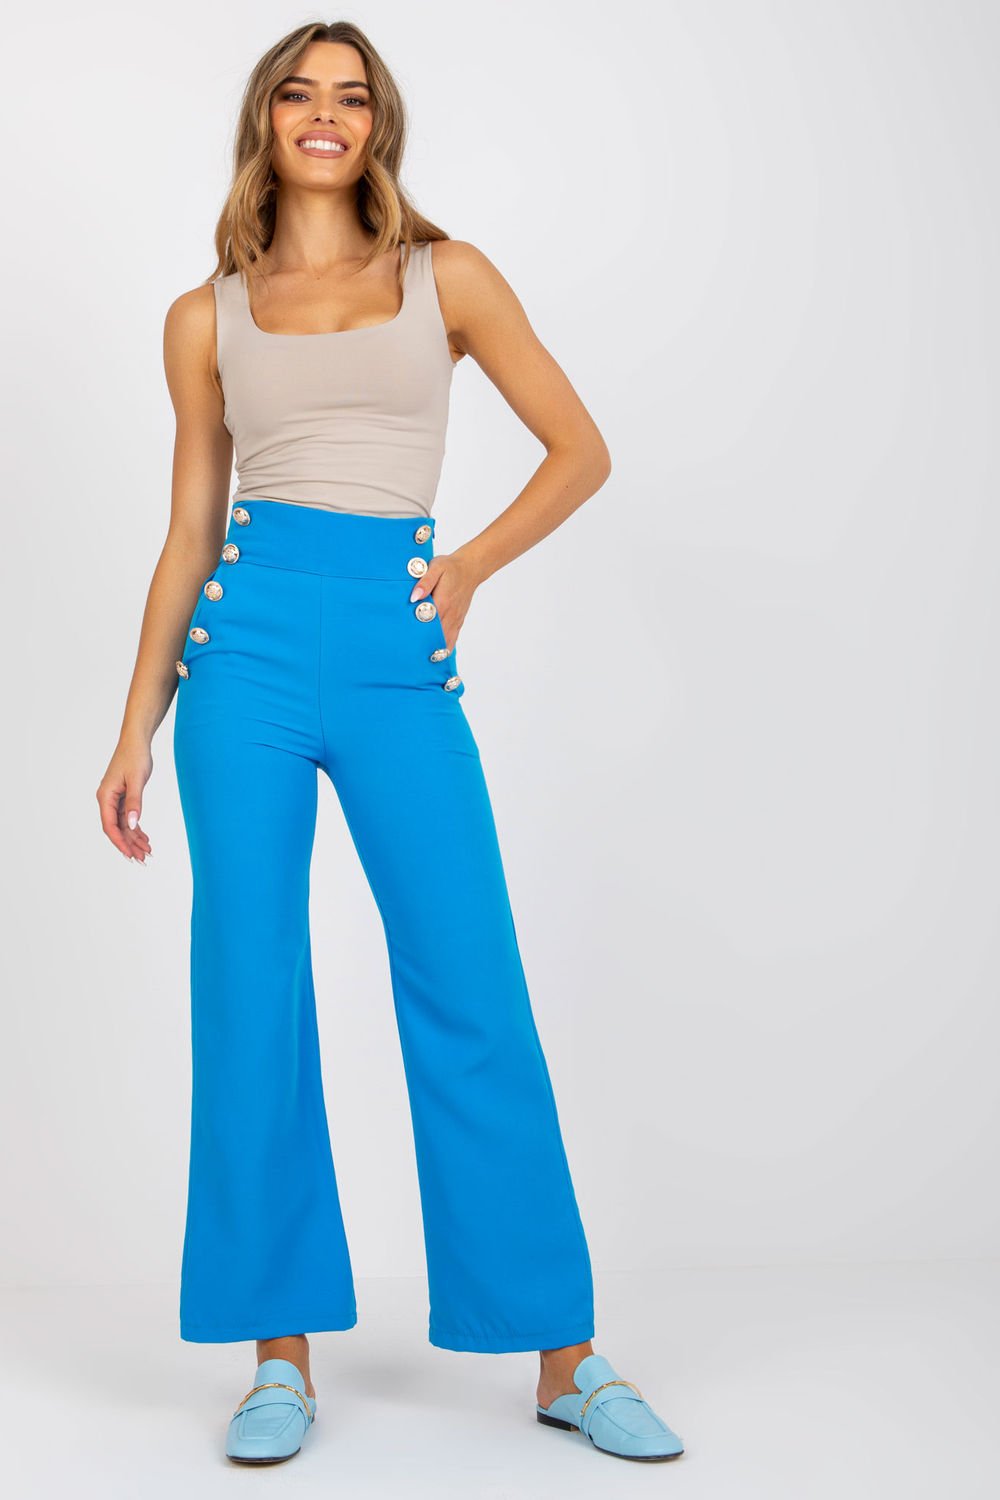 Buy High Waist Suit Pants Decorative Buttons at Strictly Influential